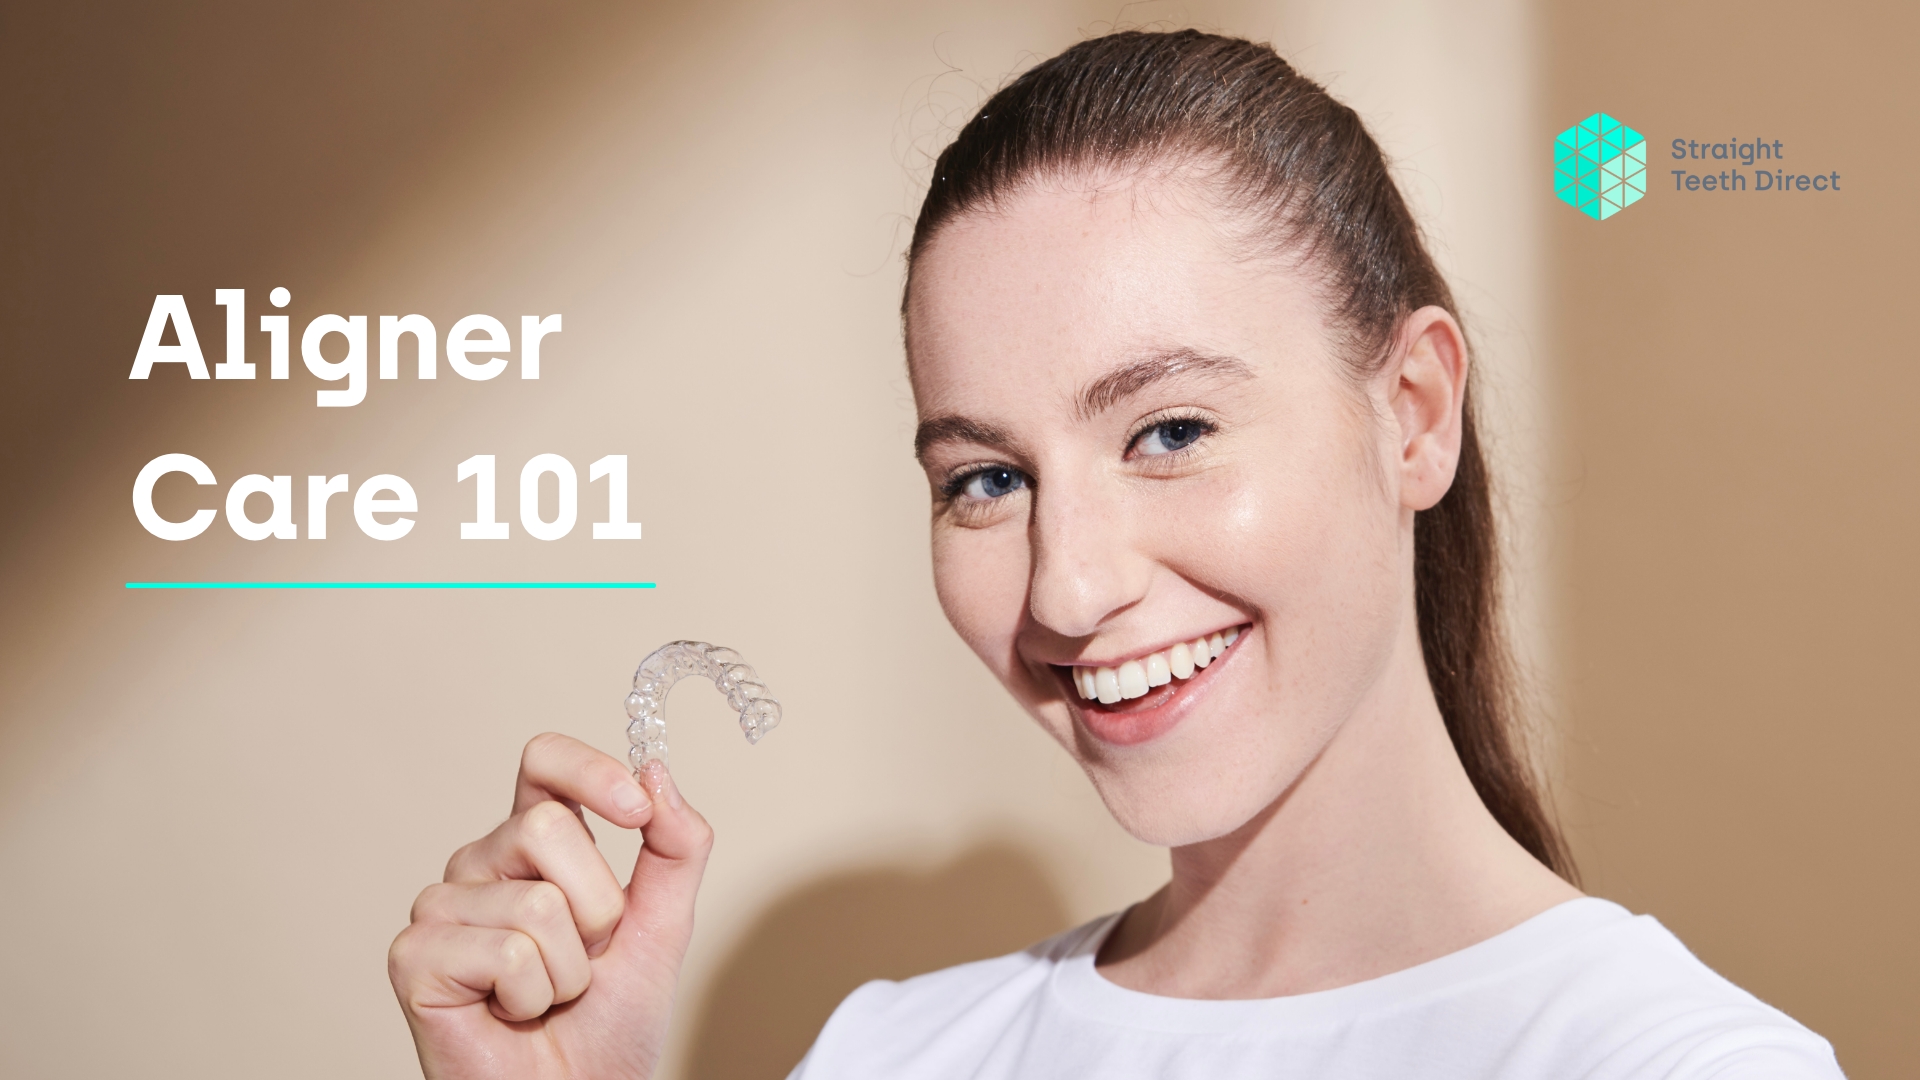 Aligner Care 101 - Look after your aligners and they'll look after your teeth!